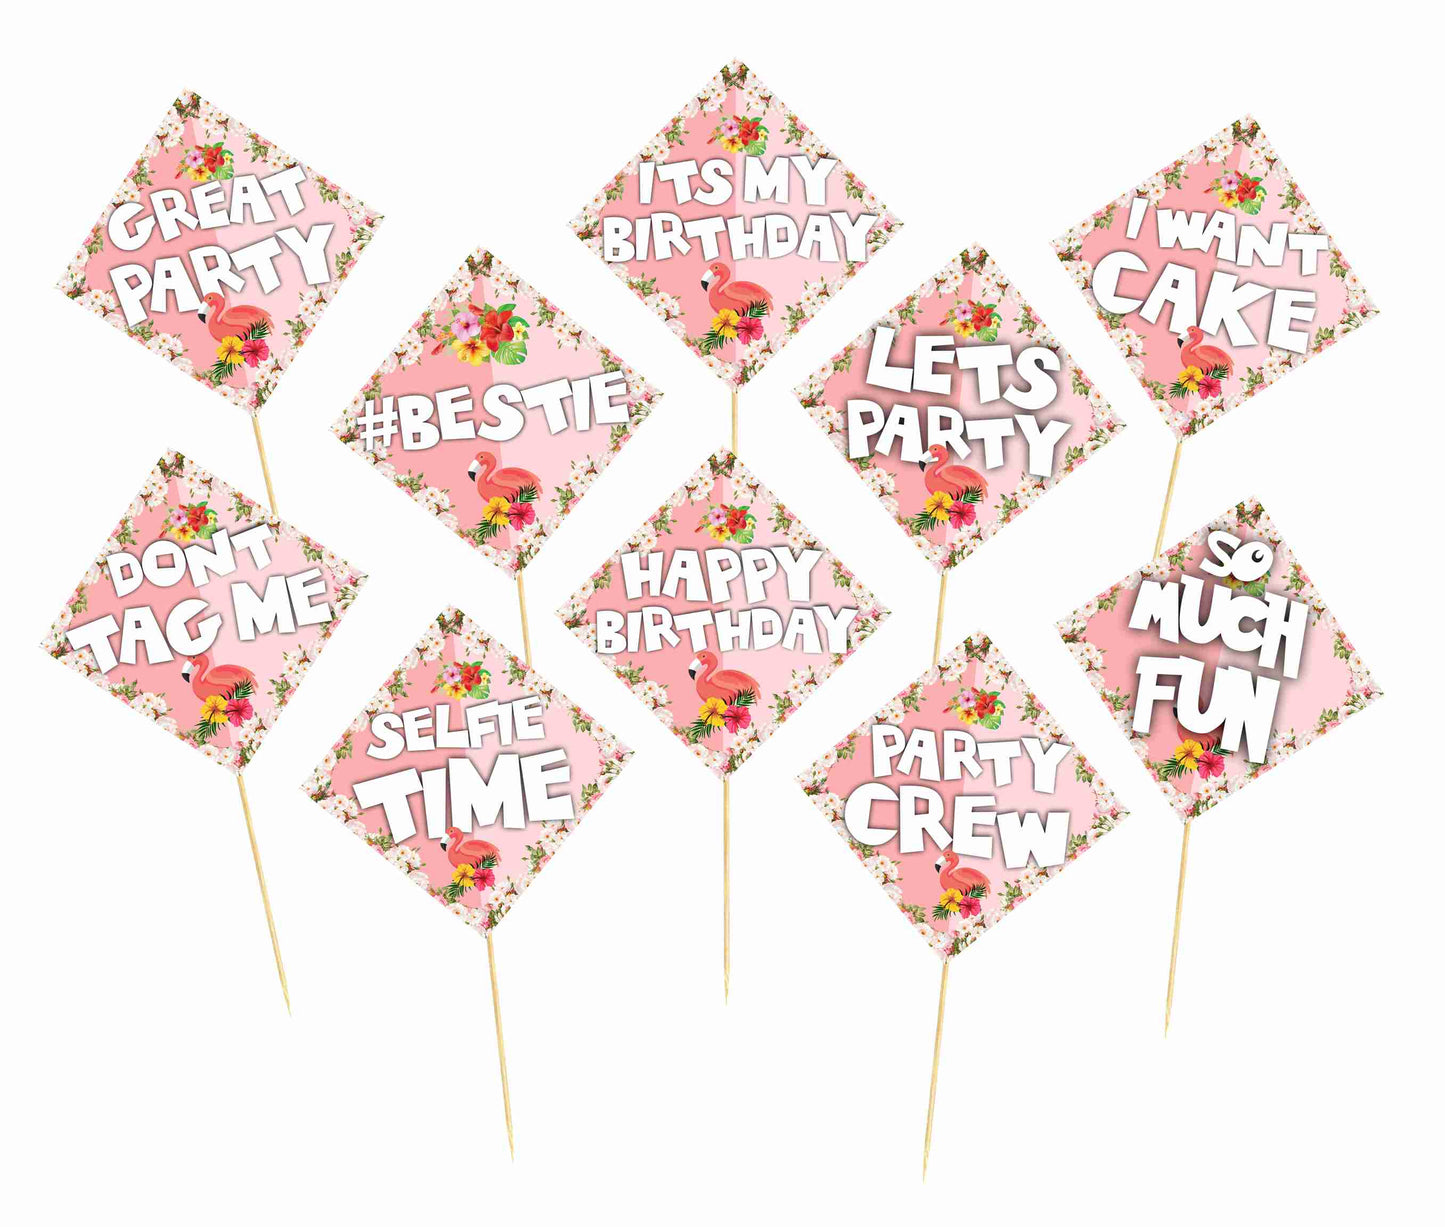 Flamingo Birthday Photo Booth Party Props Theme Birthday Party Decoration, Birthday Photo Booth Party Item for Adults and Kids